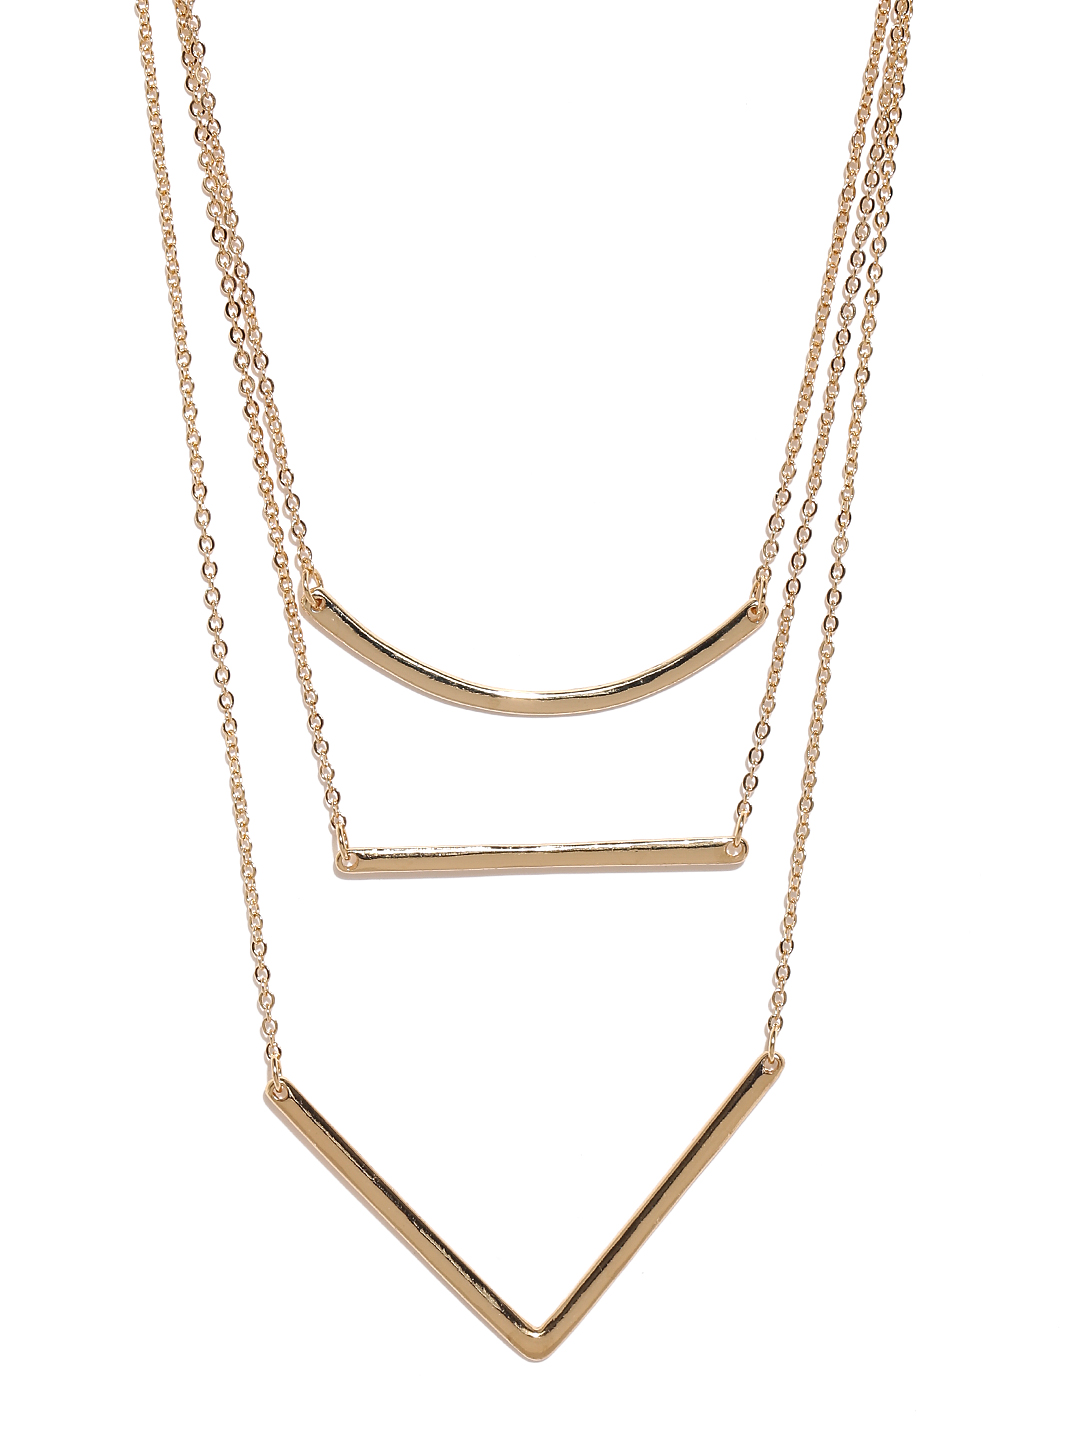 FOREVER 21 Gold-Toned Layered Necklace